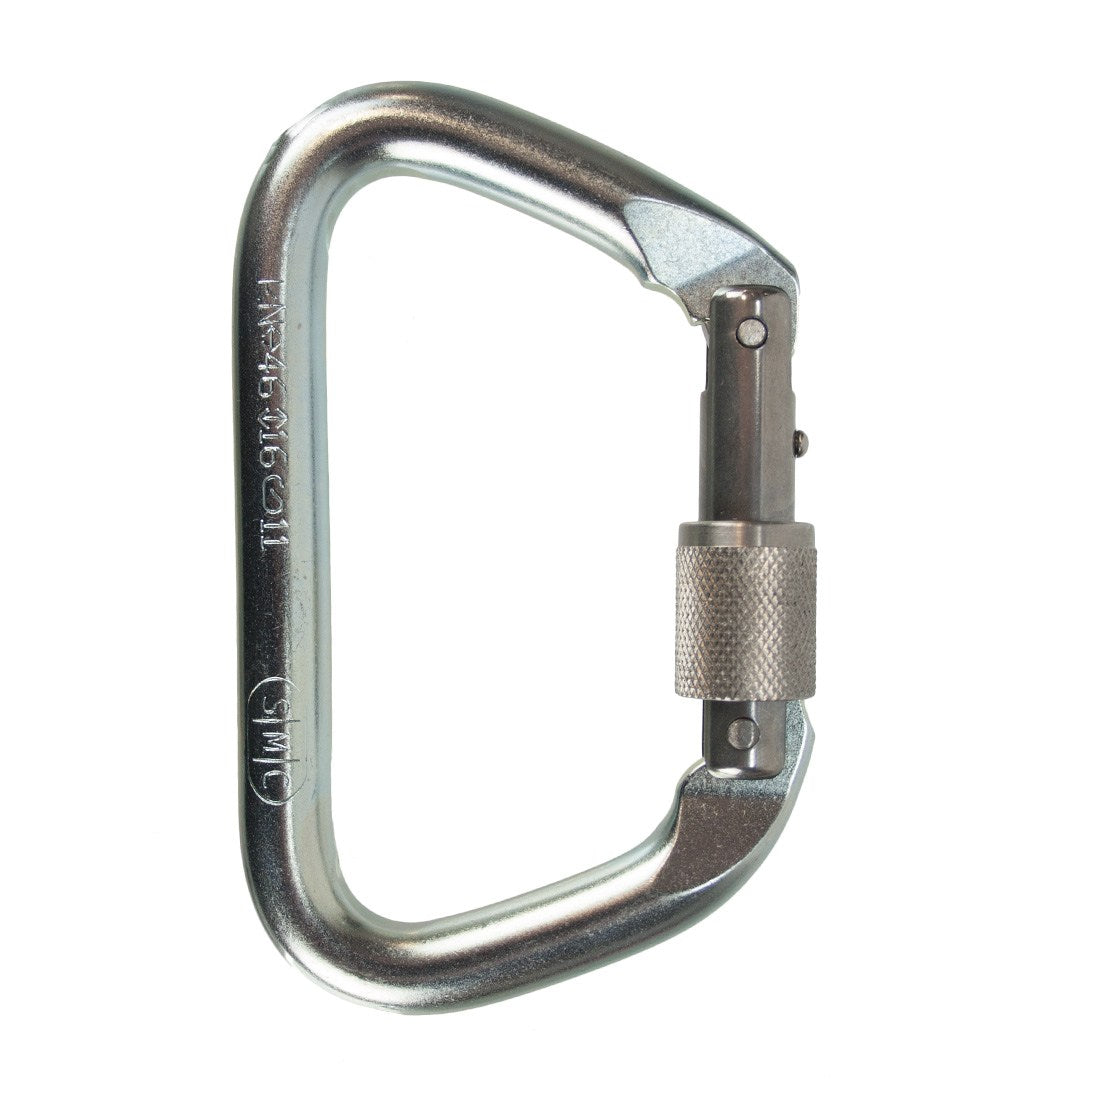 SMC Steel Locking Carabiner - Large - Right Side View